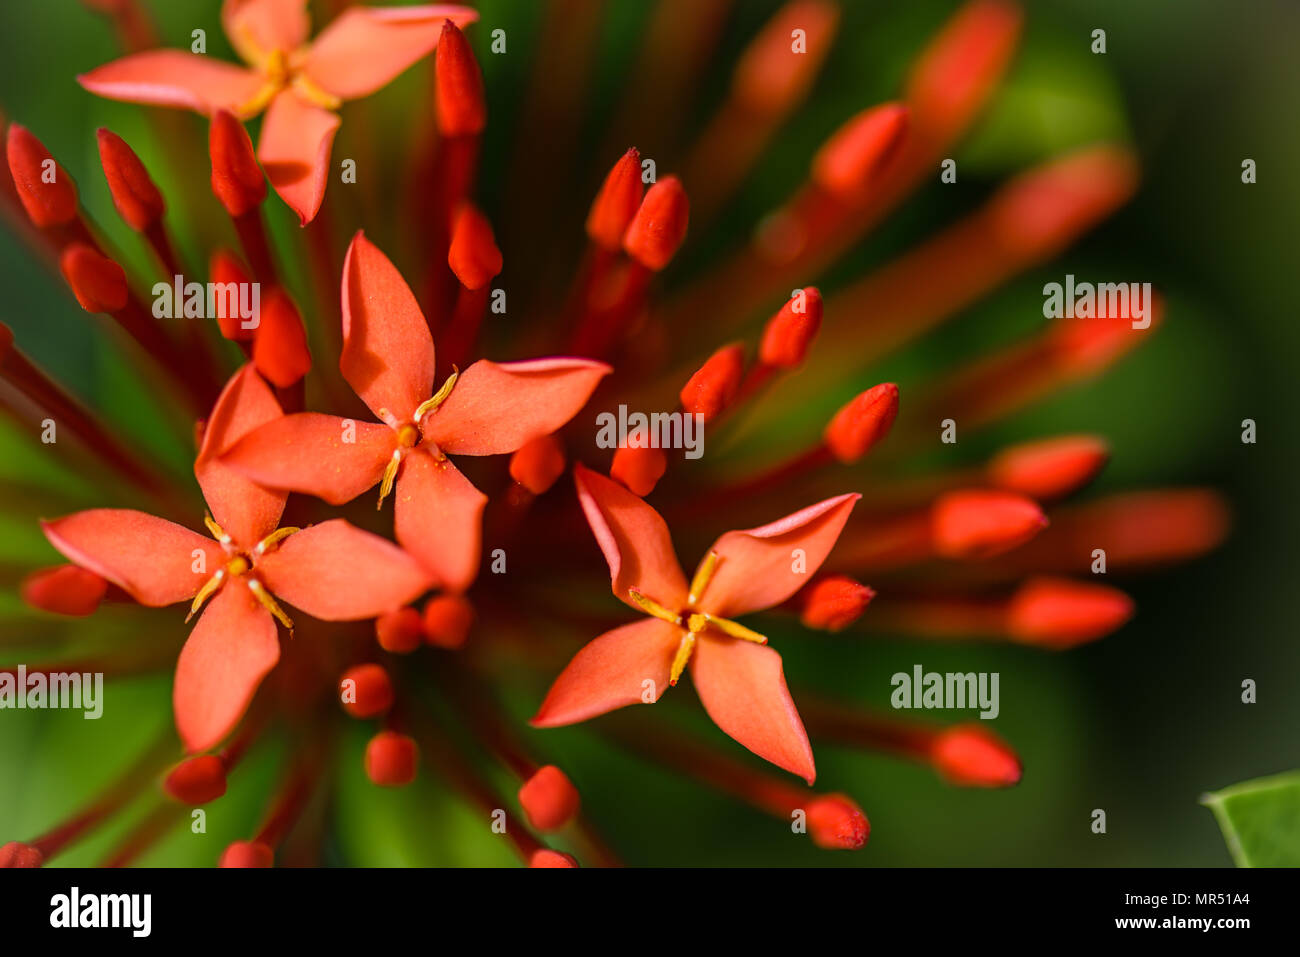 Soft focus red spike flowers blossom in the garden, tropical flowers. Stock Photo